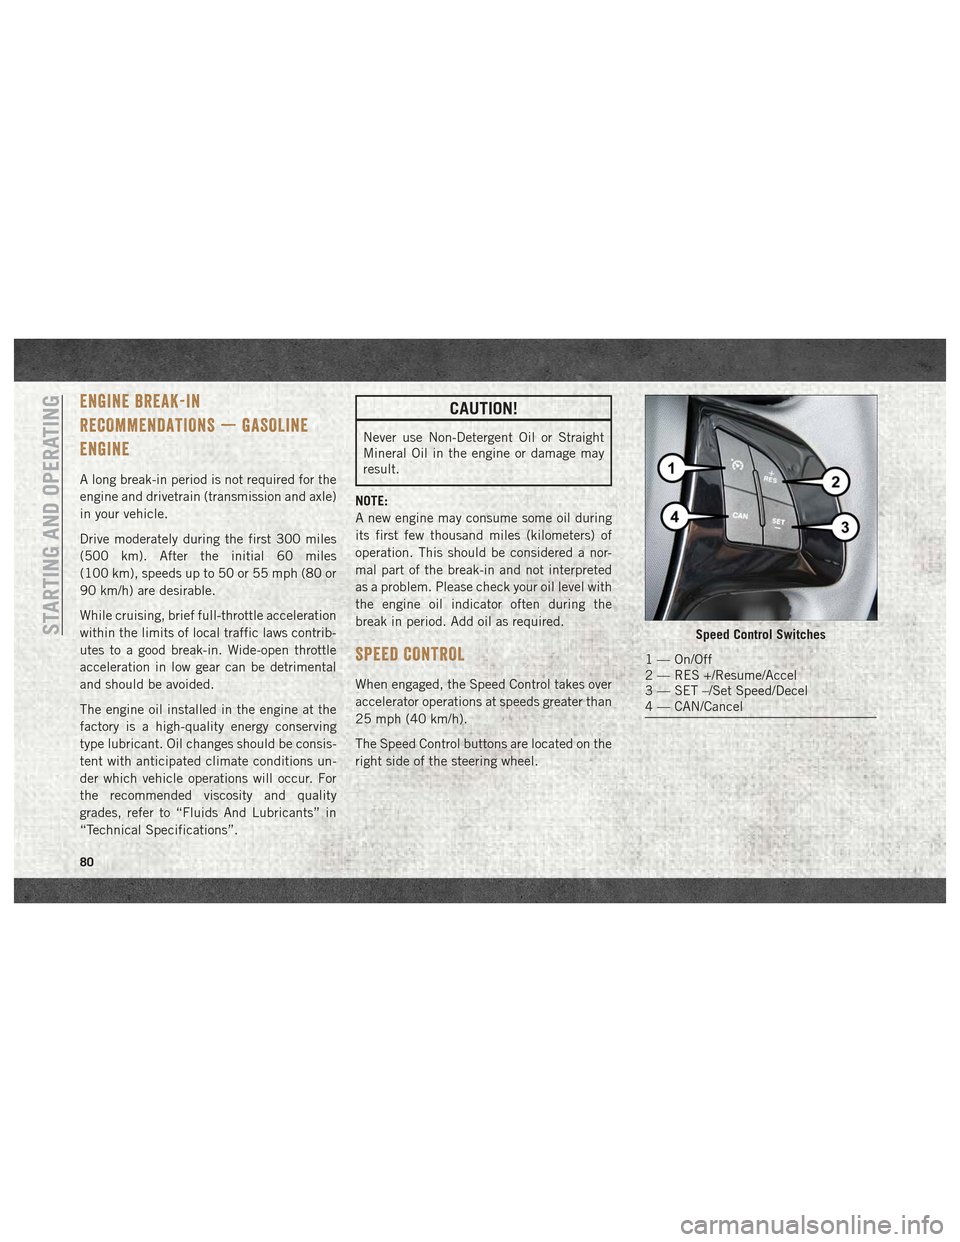 Ram ProMaster City 2018  User Guide ENGINE BREAK-IN
RECOMMENDATIONS — GASOLINE
ENGINE
A long break-in period is not required for the
engine and drivetrain (transmission and axle)
in your vehicle.
Drive moderately during the first 300 